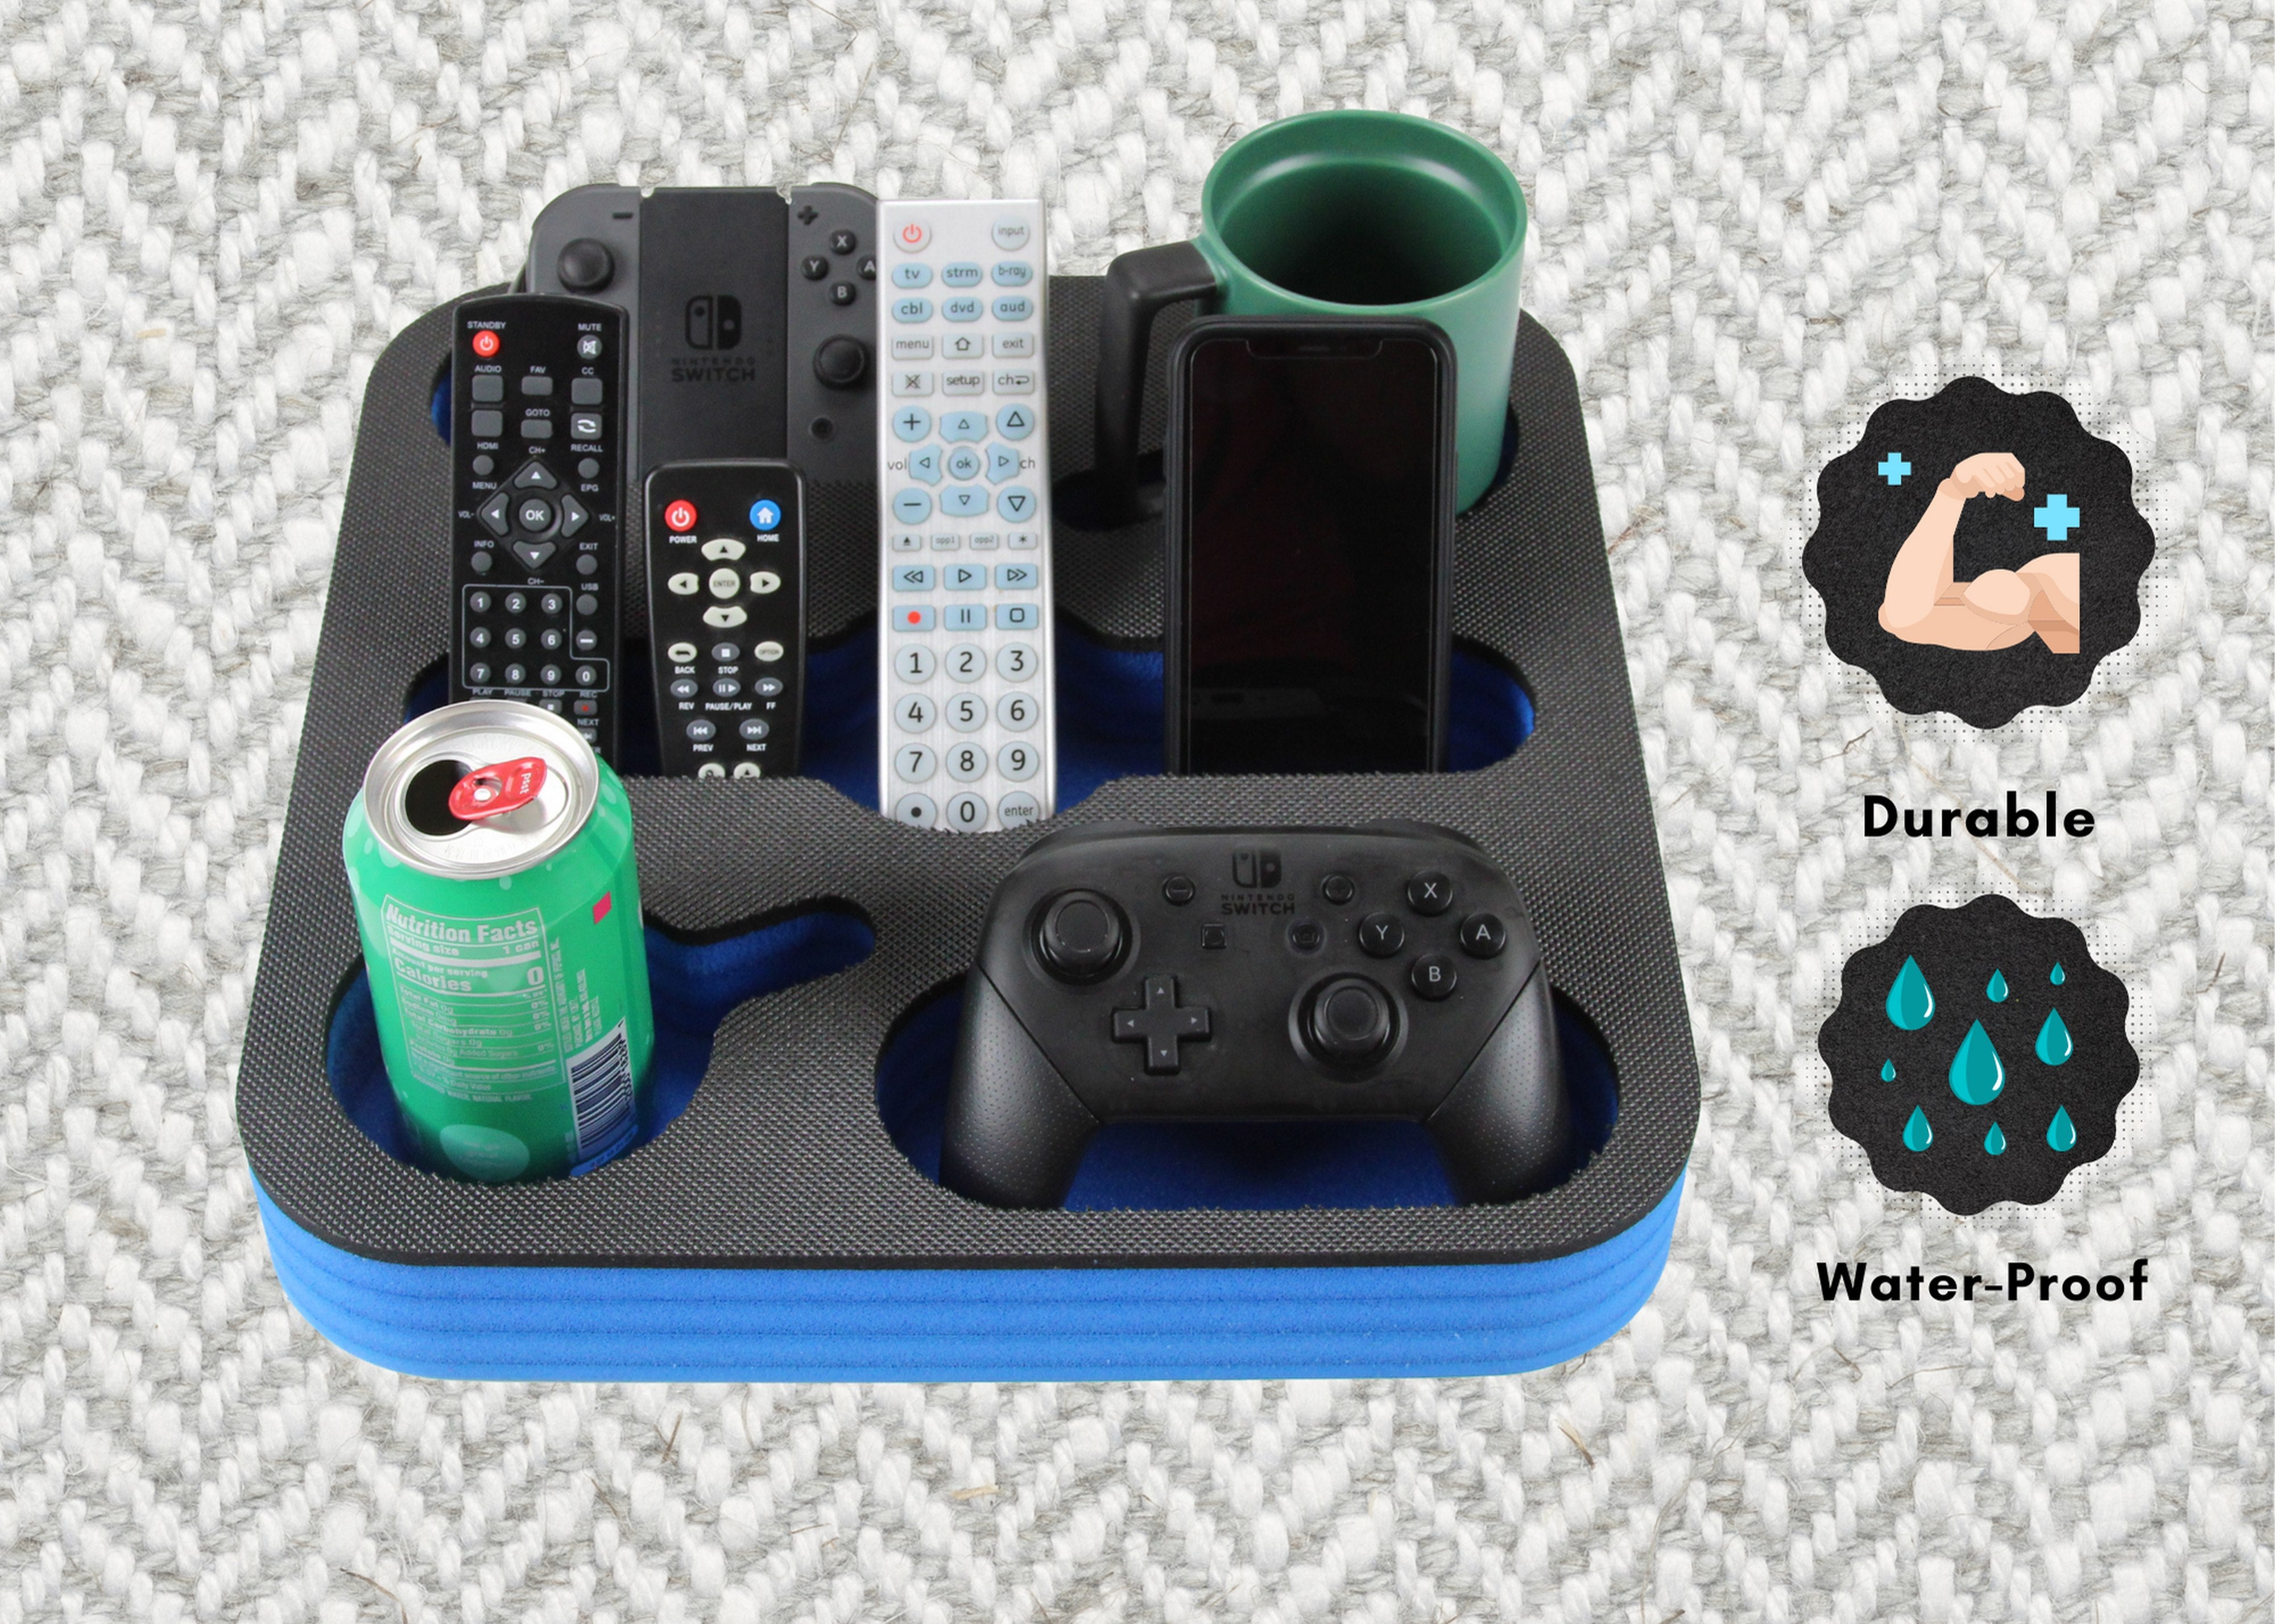 Couch Drink Holder Refreshment Tray for Sofa Bed Floor Car RV Lounge TV Room Durable Foam 5 Compartments 2 Game Controller Slots 13.75 Inches Wide